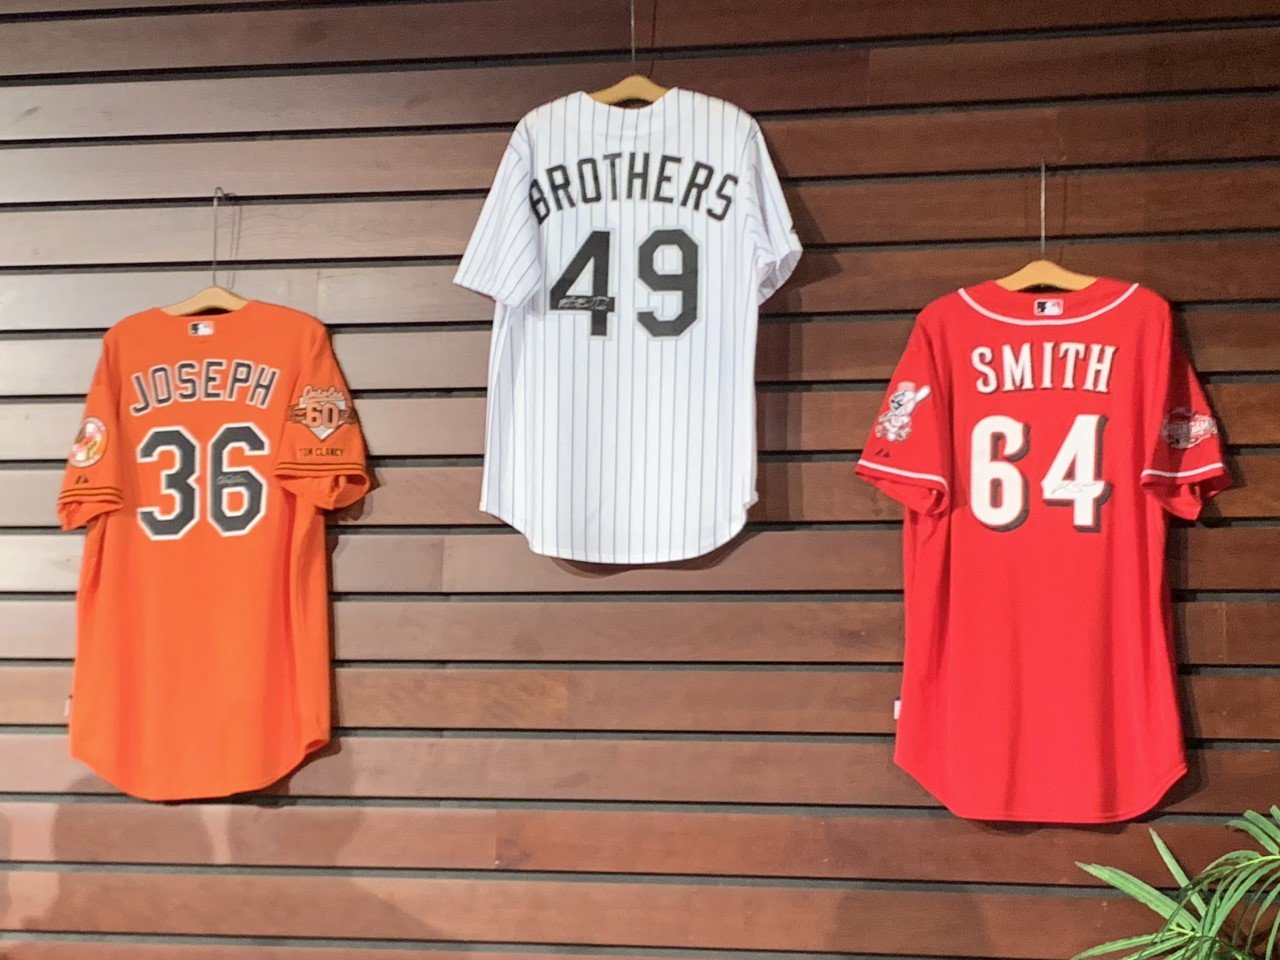 Rex Brothers, Caleb Joseph and Josh Smith all played for several Major League baseball organizations. Joseph’s Baltimore Orioles jersey, Brothers’ Colorado Rockies jersey and Josh Smith’s Cincinnati Reds jersey were on display during Lipscomb baseball’s annual “First Pitch” Dinner.